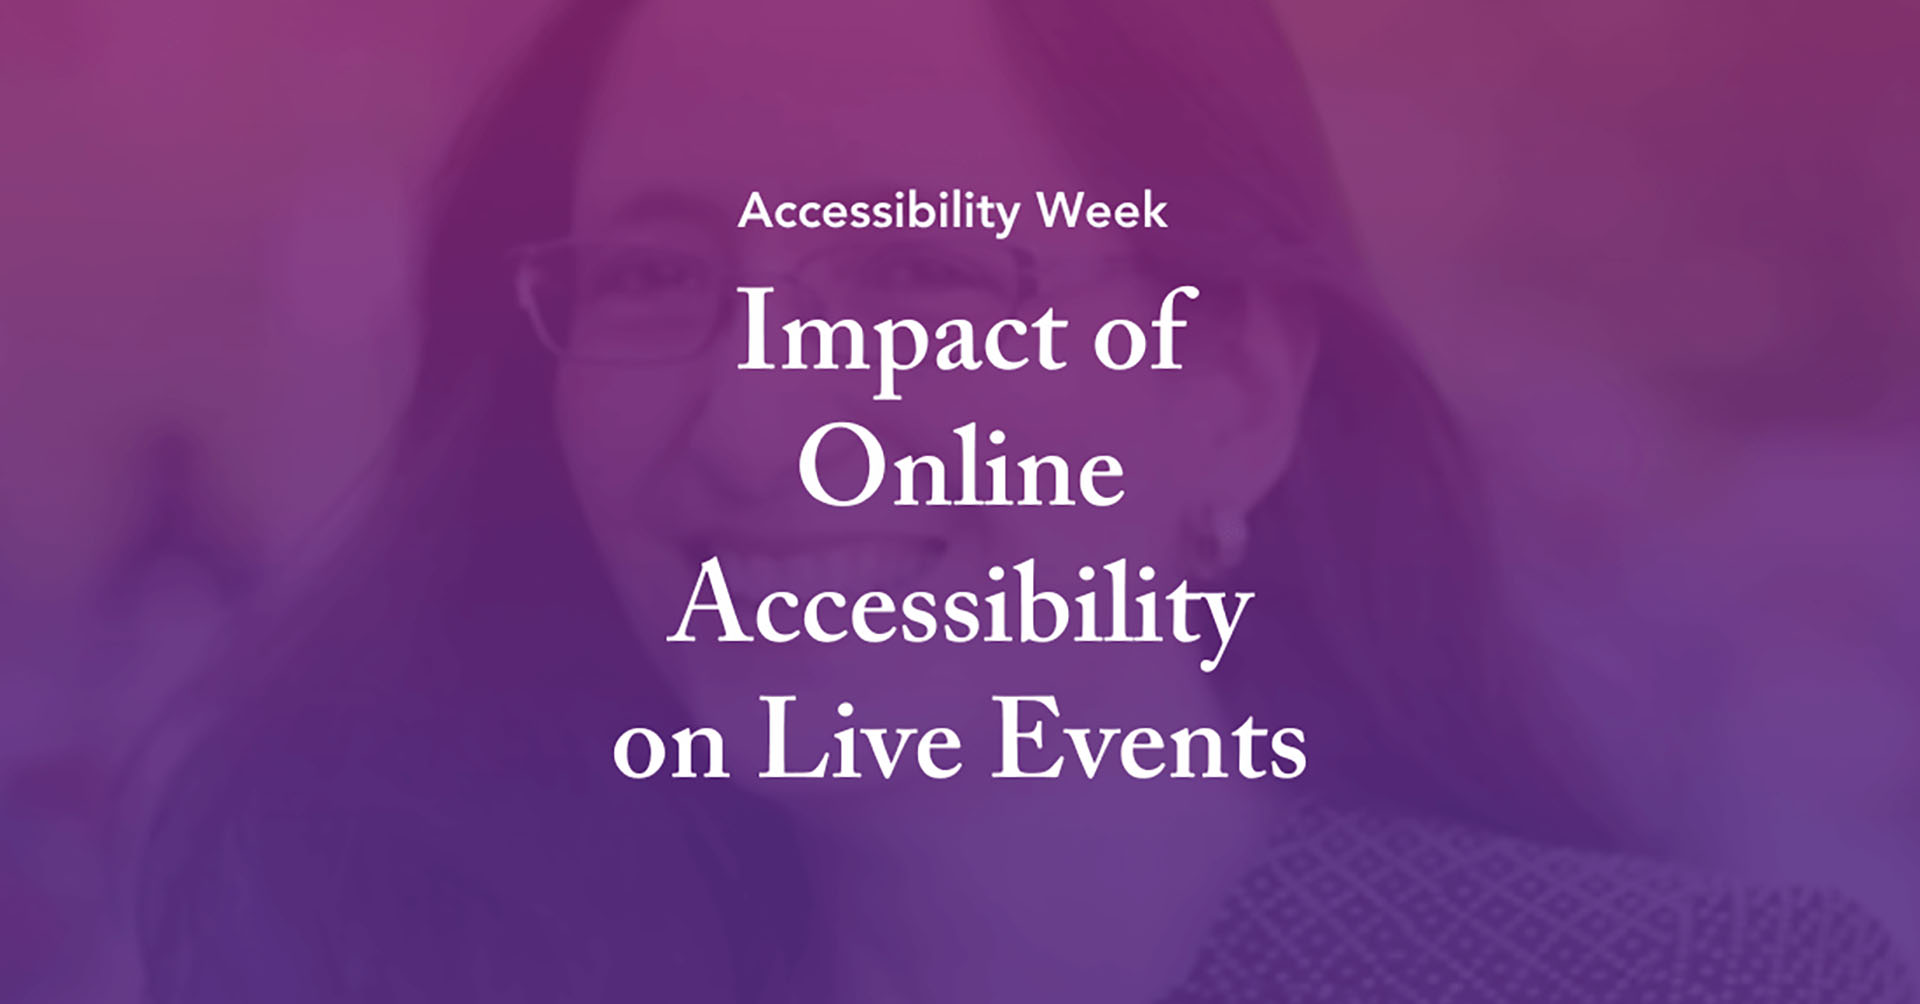 Accessibility Week - Impact of Online Accessibility on Live Events